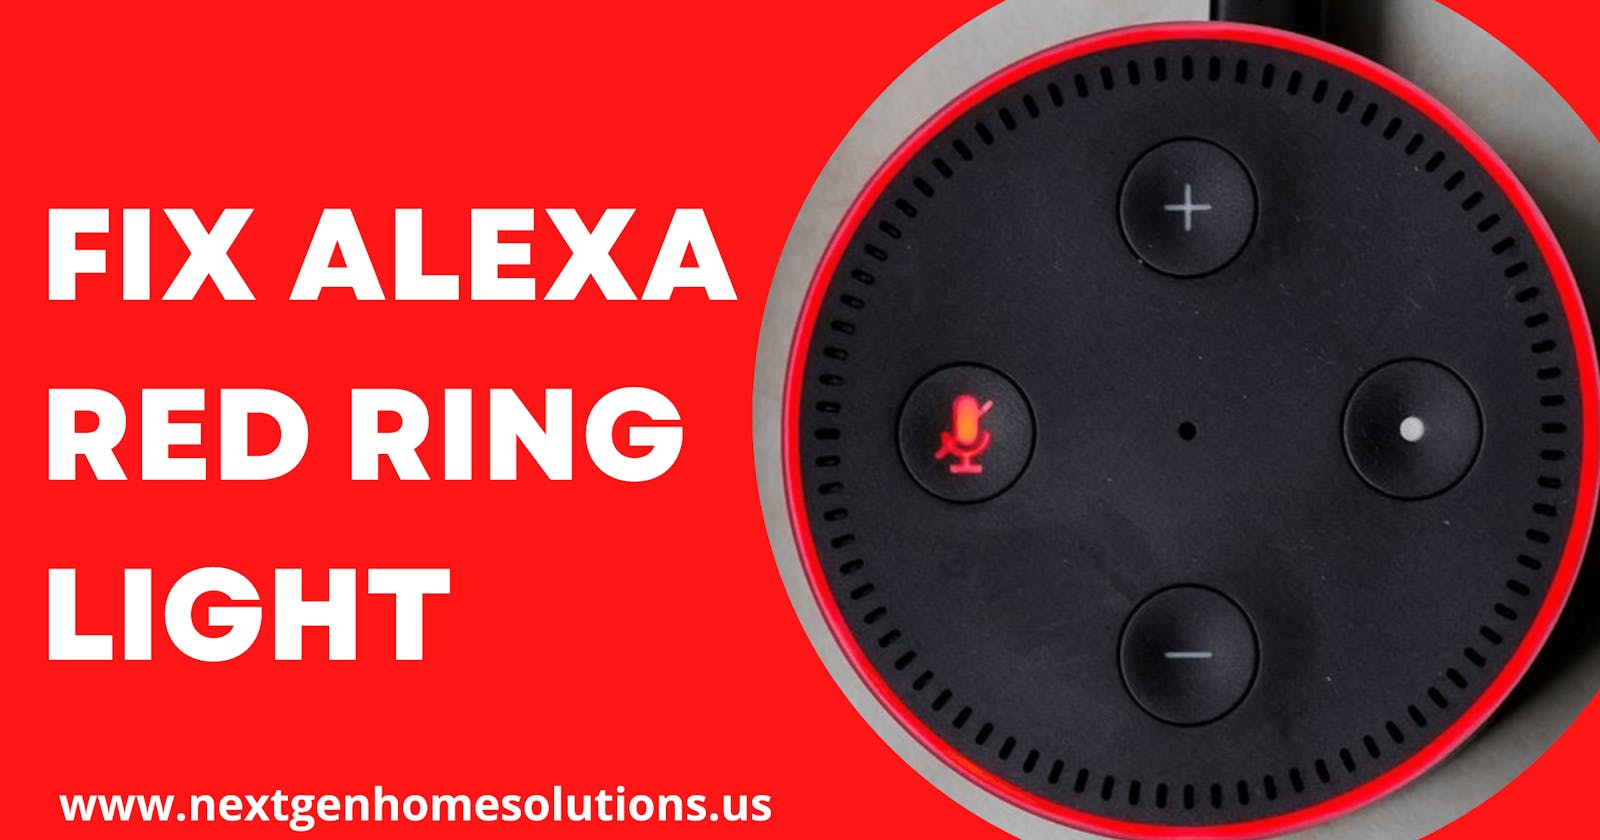 Causes & Solutions to Fix Alexa Echo Red Ring Issue